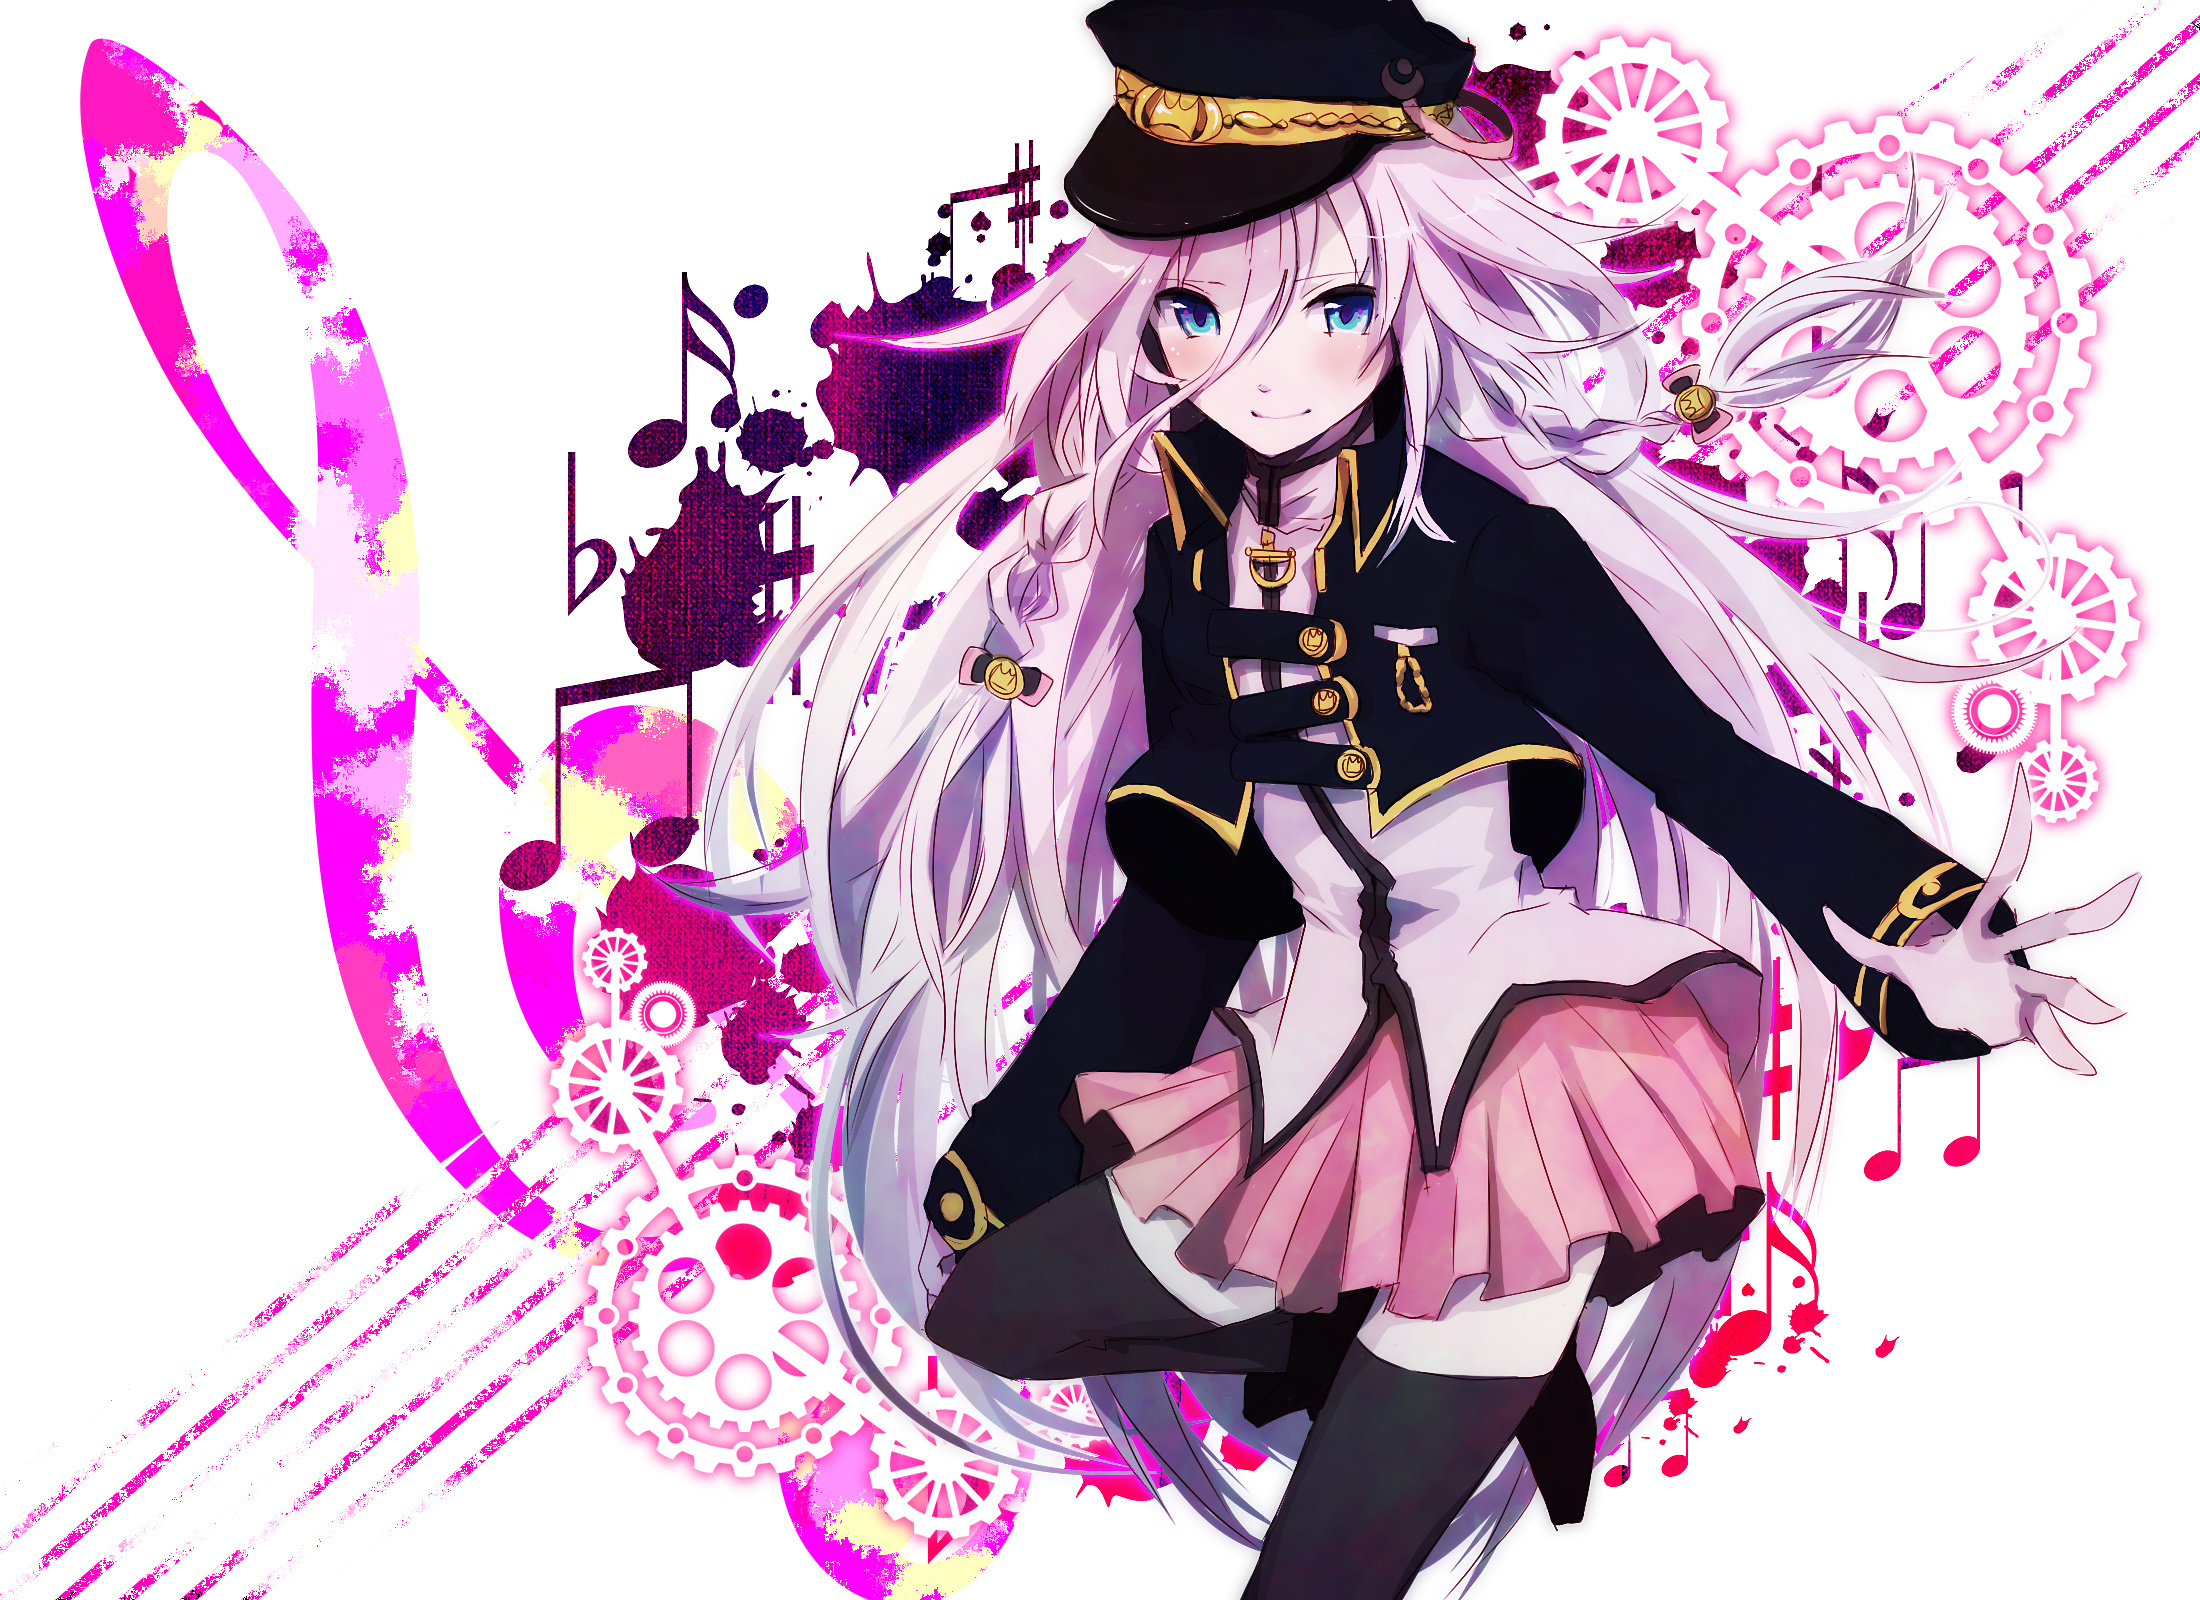 IA Vocaloid, High-resolution wallpapers, Unique vocaloid character, Anime idol, 2200x1600 HD Desktop